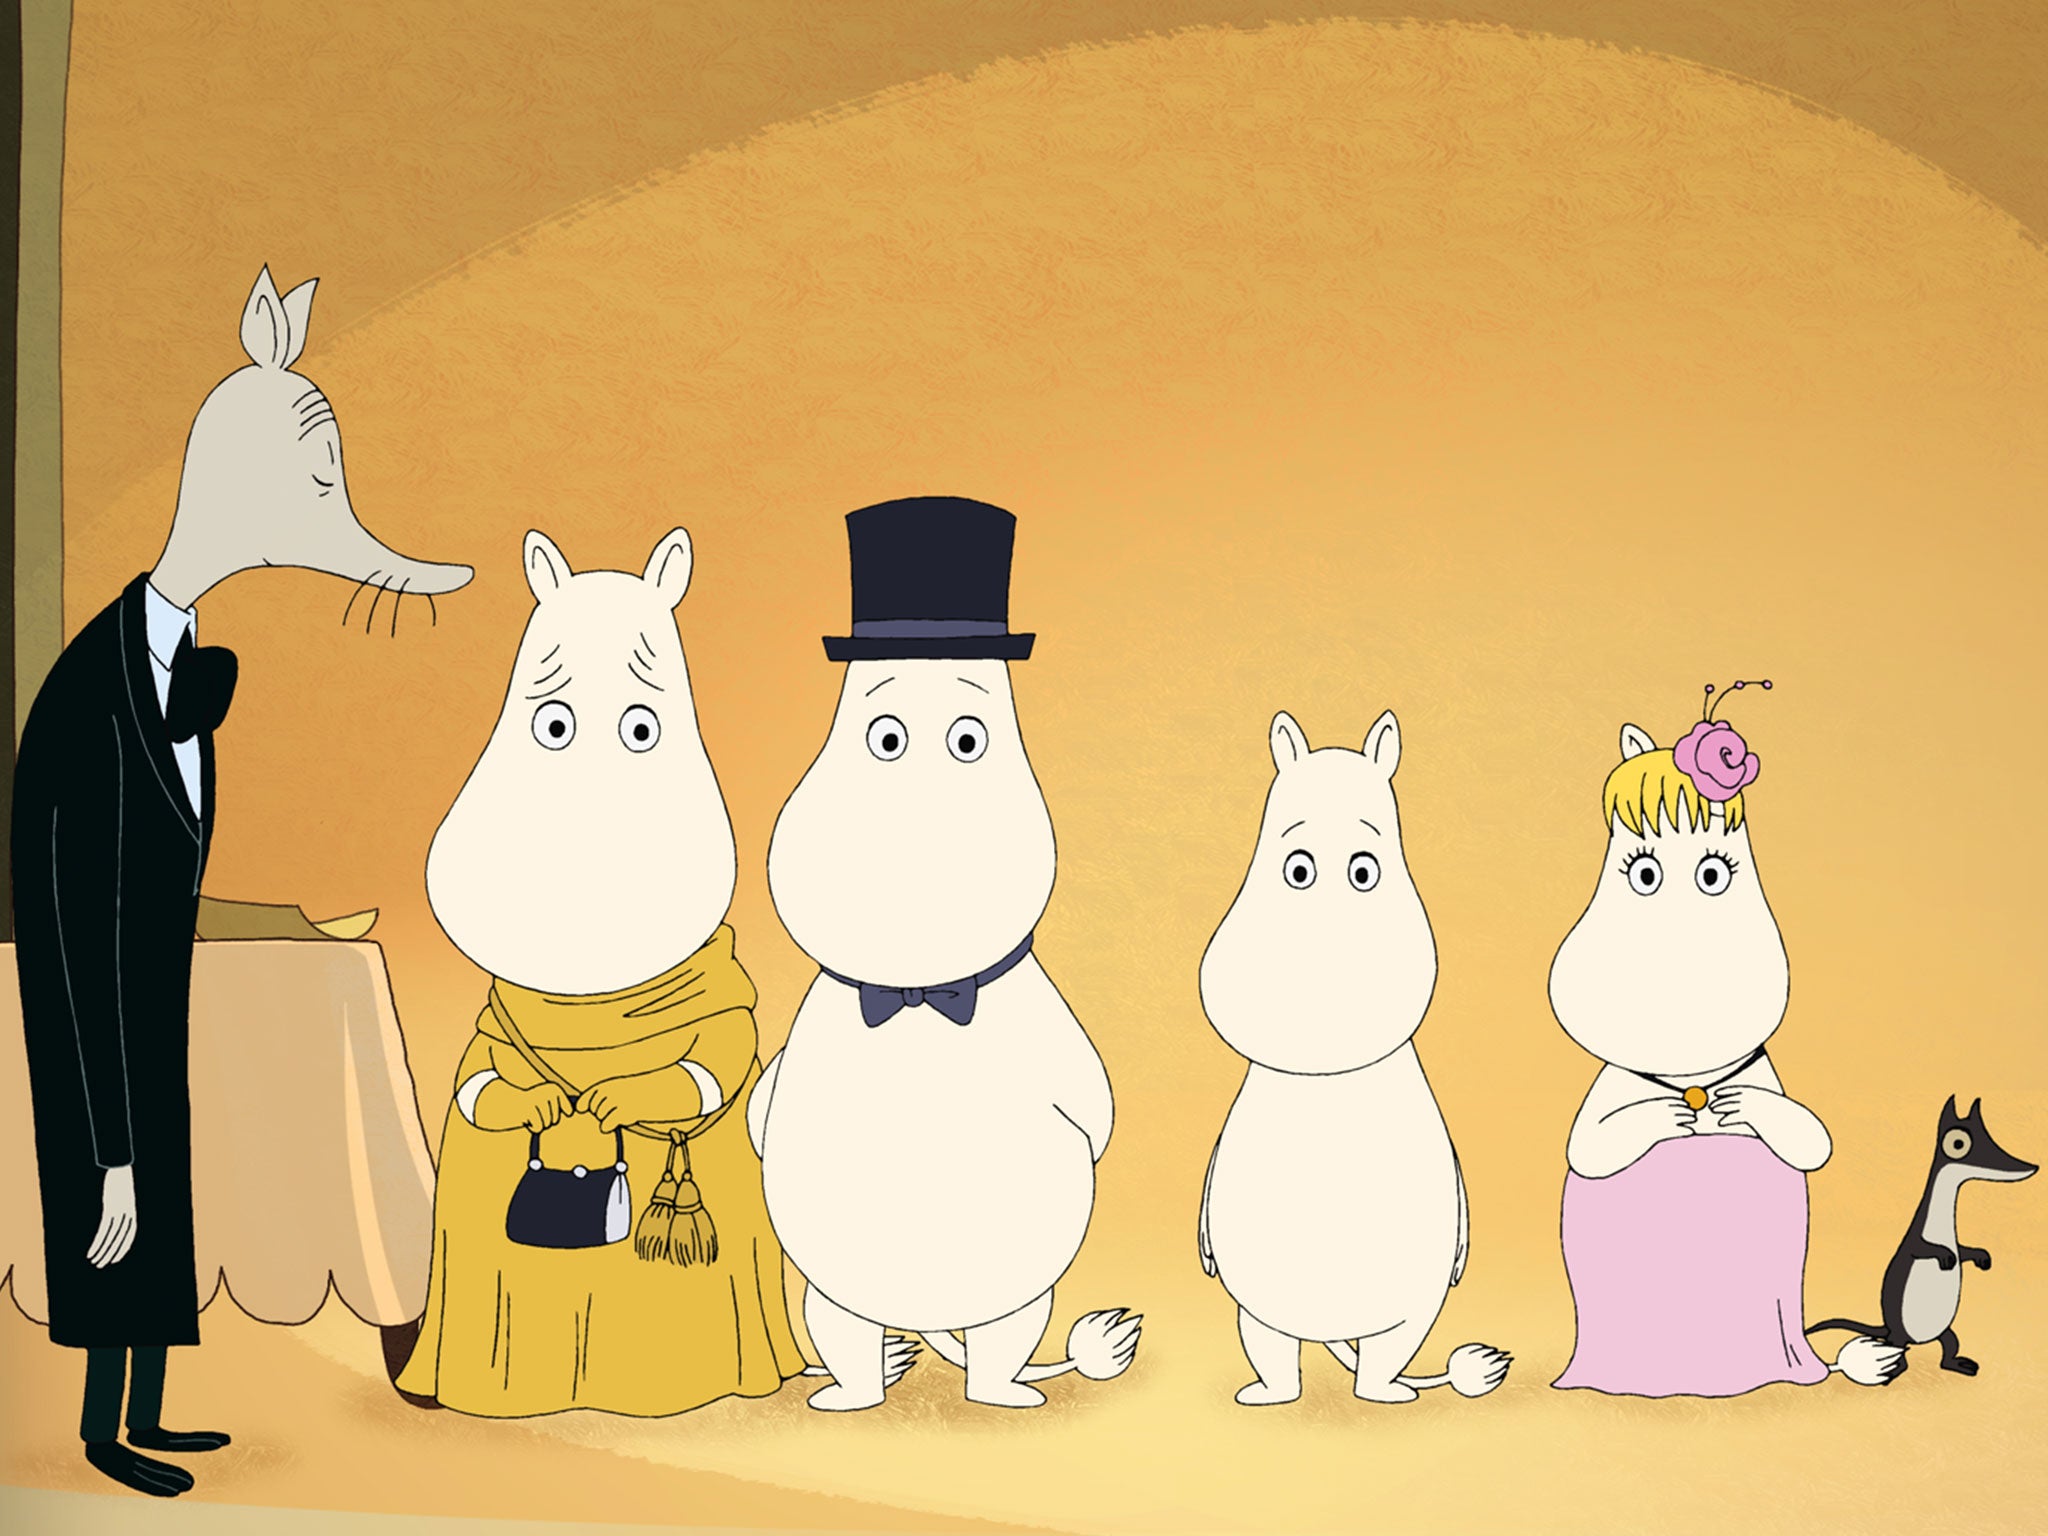 Gently does it: Tove Jansson's classic tales revisited in 'The Moomins on the Riviera'